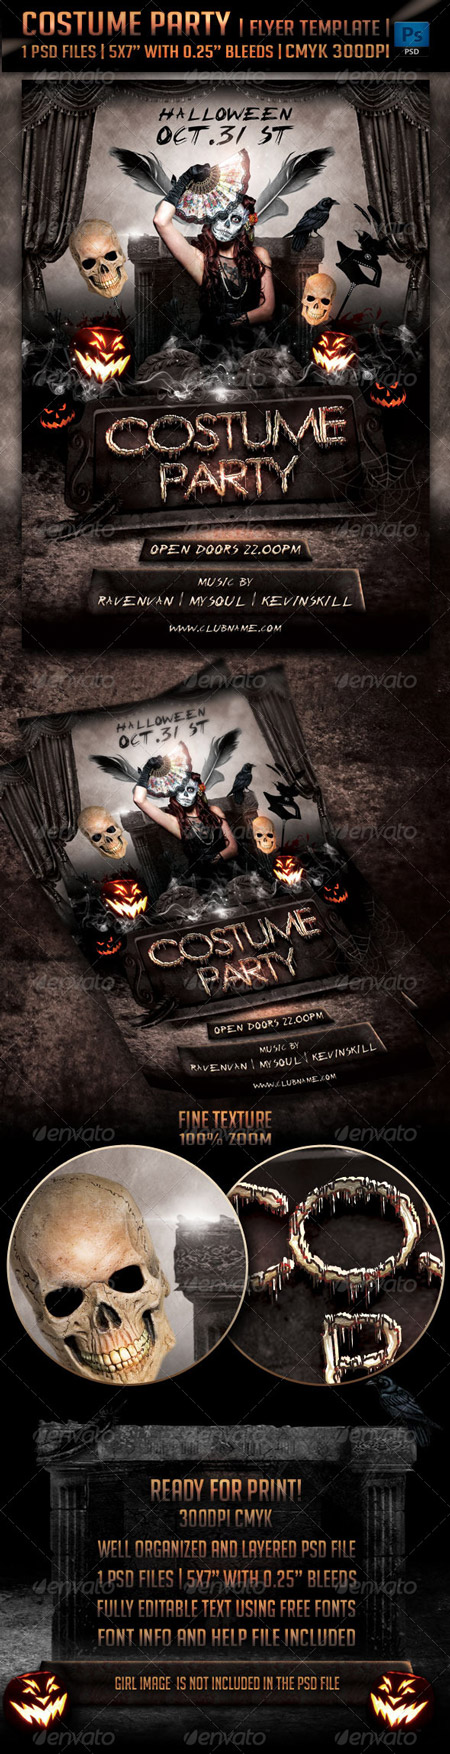 PSD - Costume Party Flyer Template